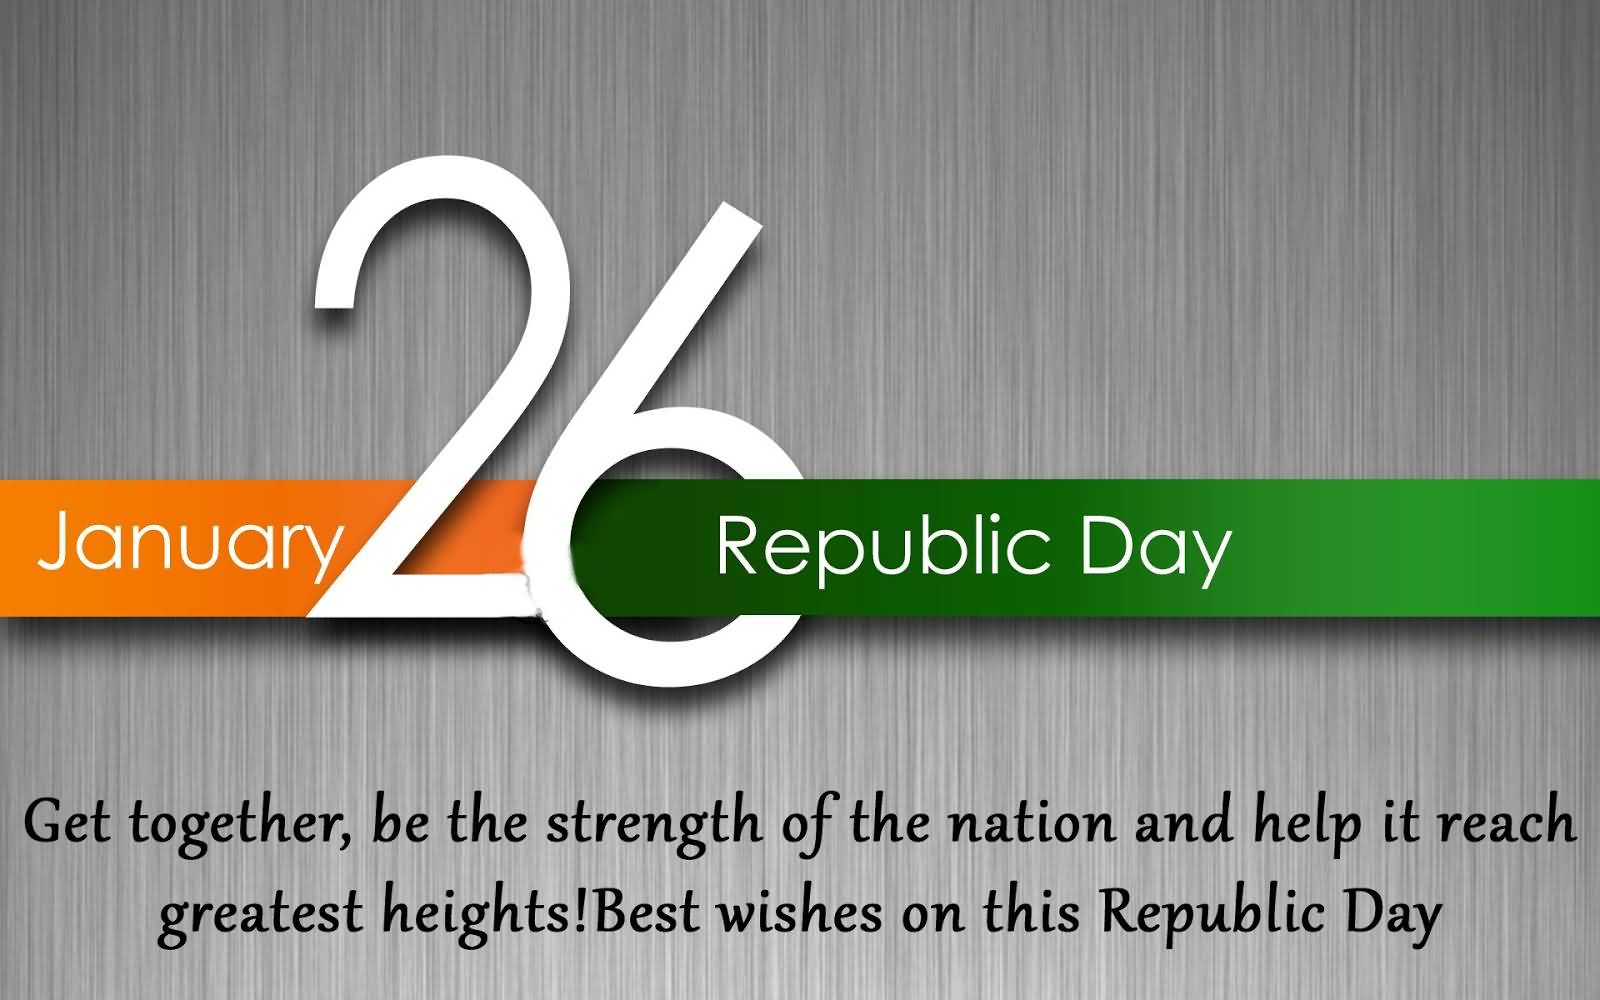 January 26 Republic Day Get Together, Be The Strength Of The Nation And Help It Reach Greatest Heights Best Wishes On This Republic Day